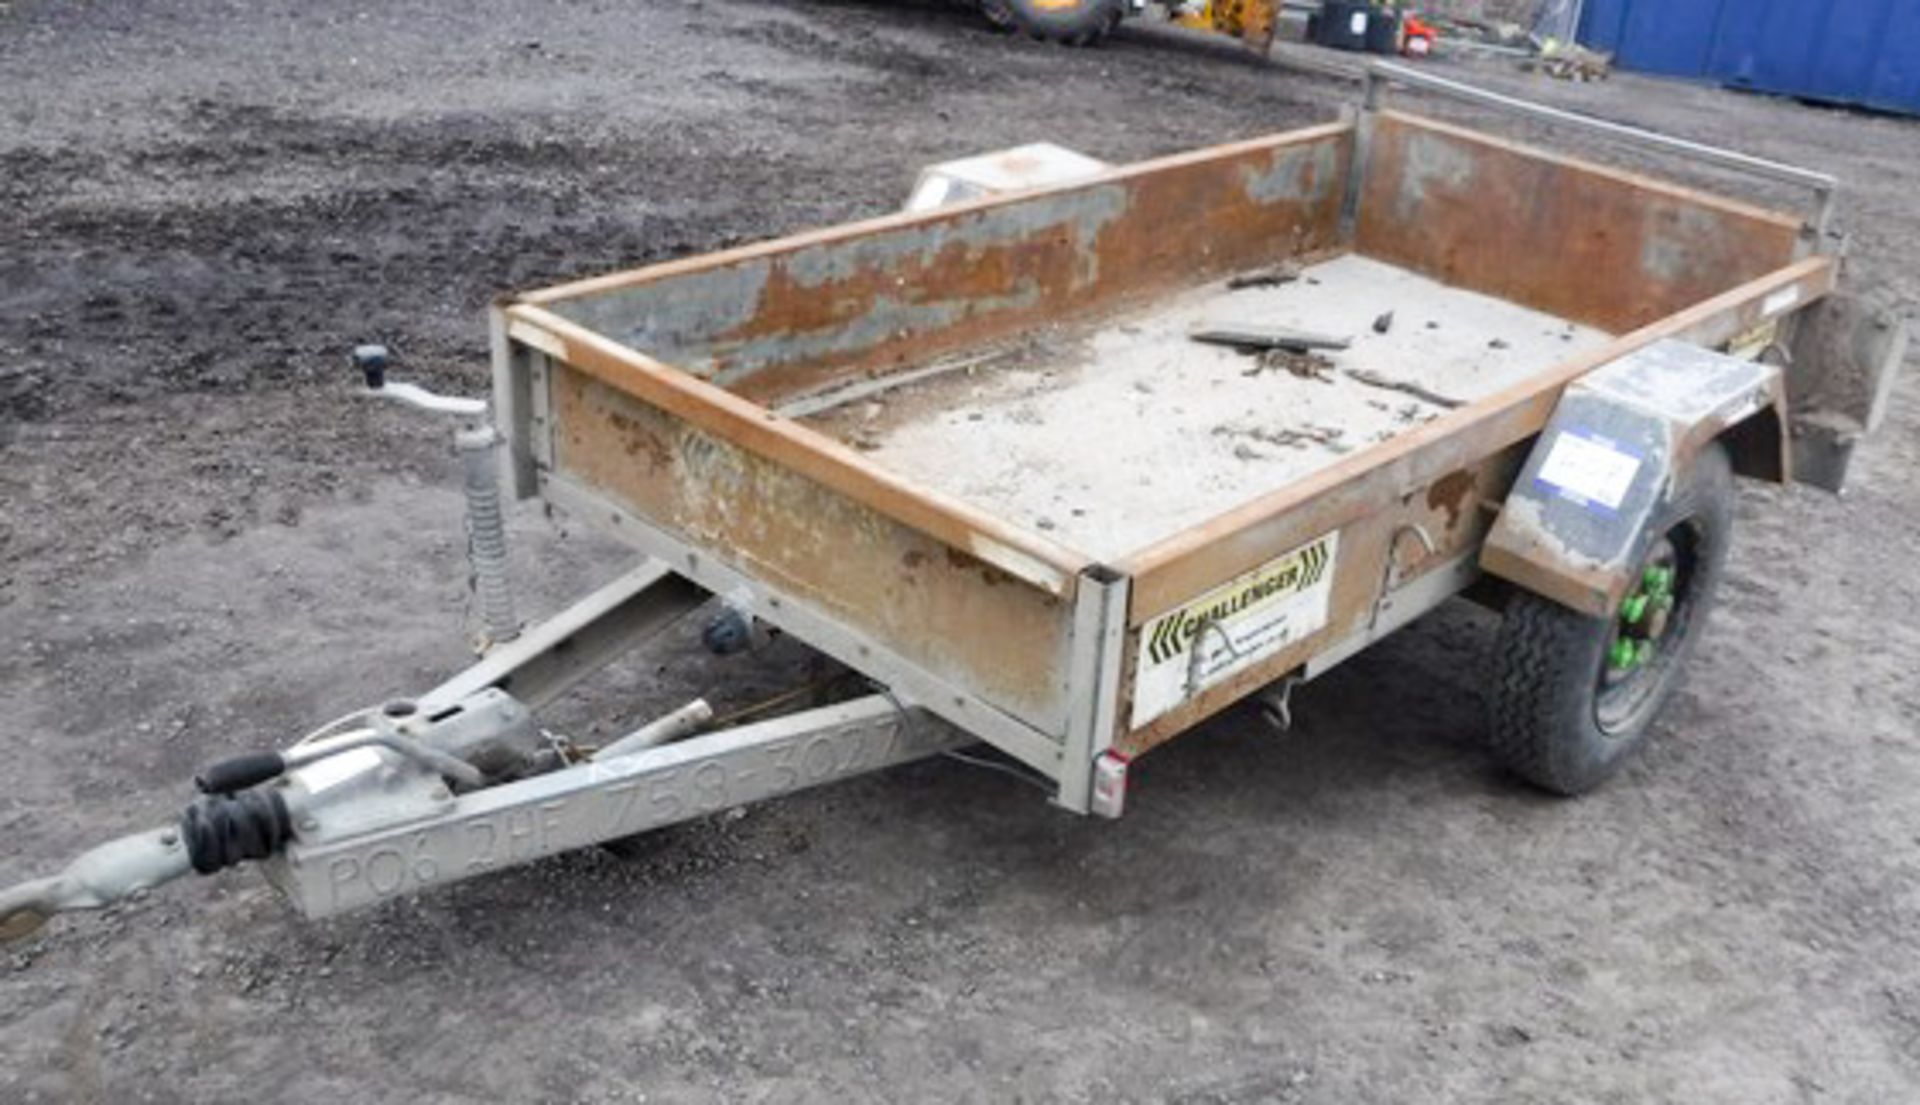 INDESPENSION CHALLANGER SINGLE AXLE TRAILER 8X4 C/W TAILGATE SN - G38405 ASSET NO - 758-3027